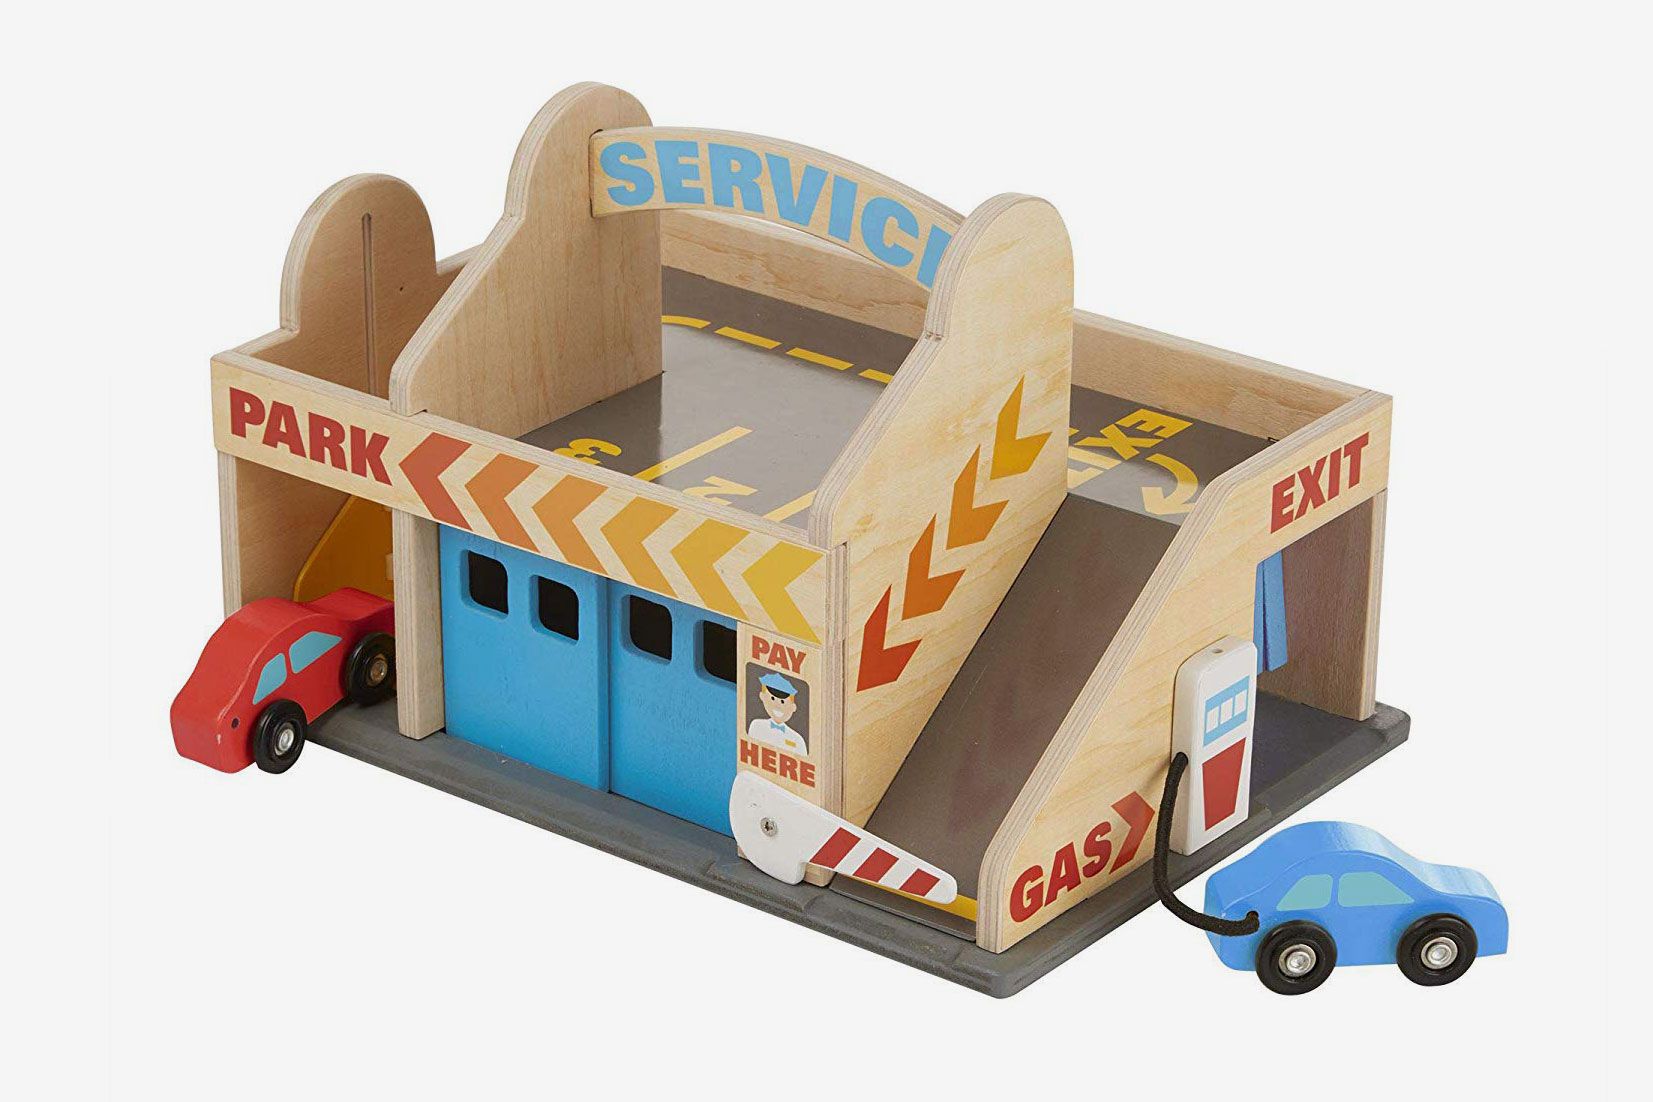 Set of 2 Kids Wooden Vehicle Toy Cars Toys Play Wooden Toy Themed Take a part